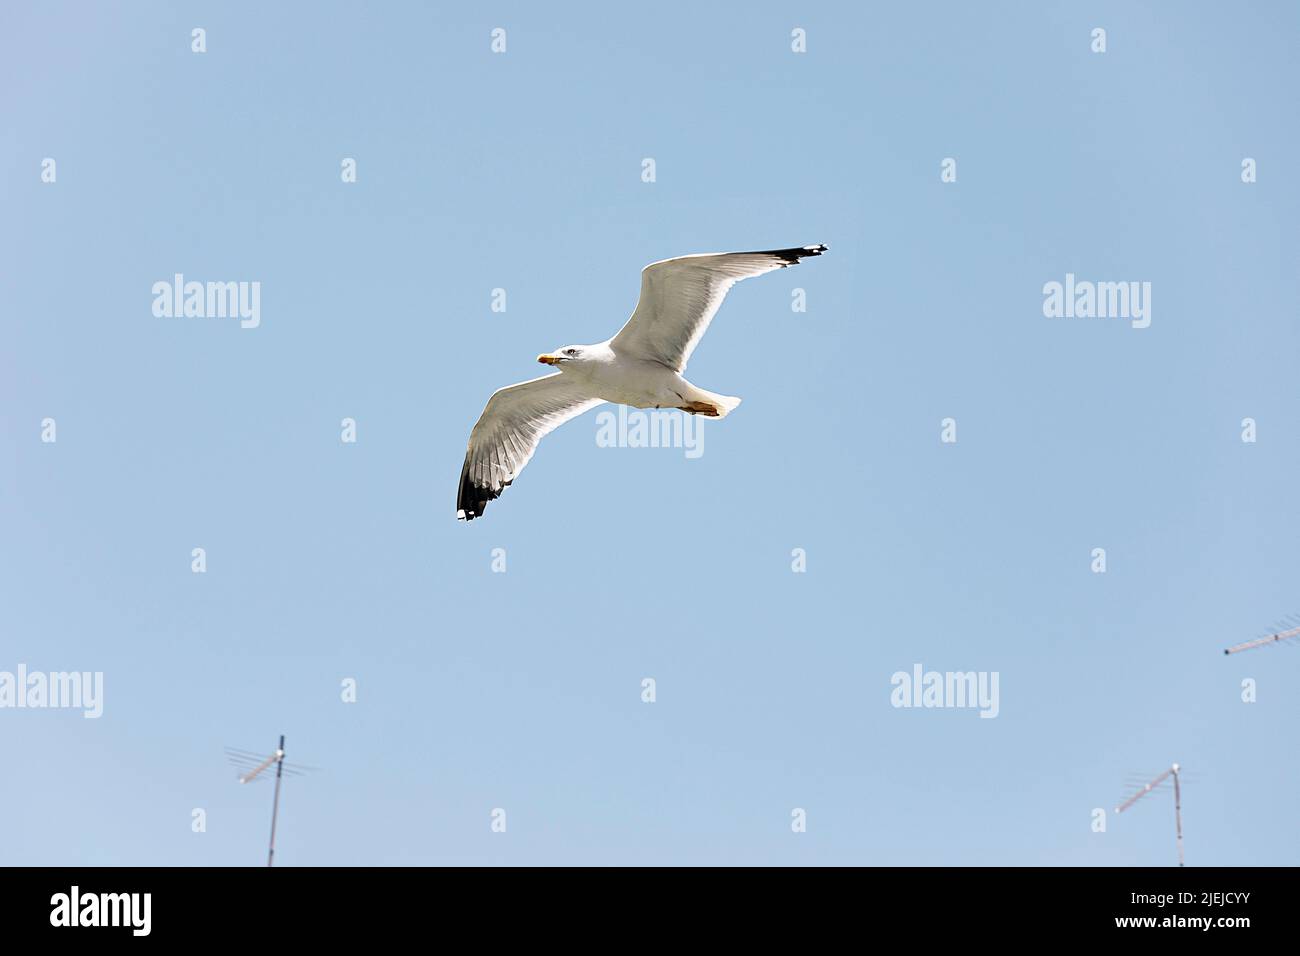 Seagull with spread wings on blue sky close-up. White sea bird flying. Stock Photo